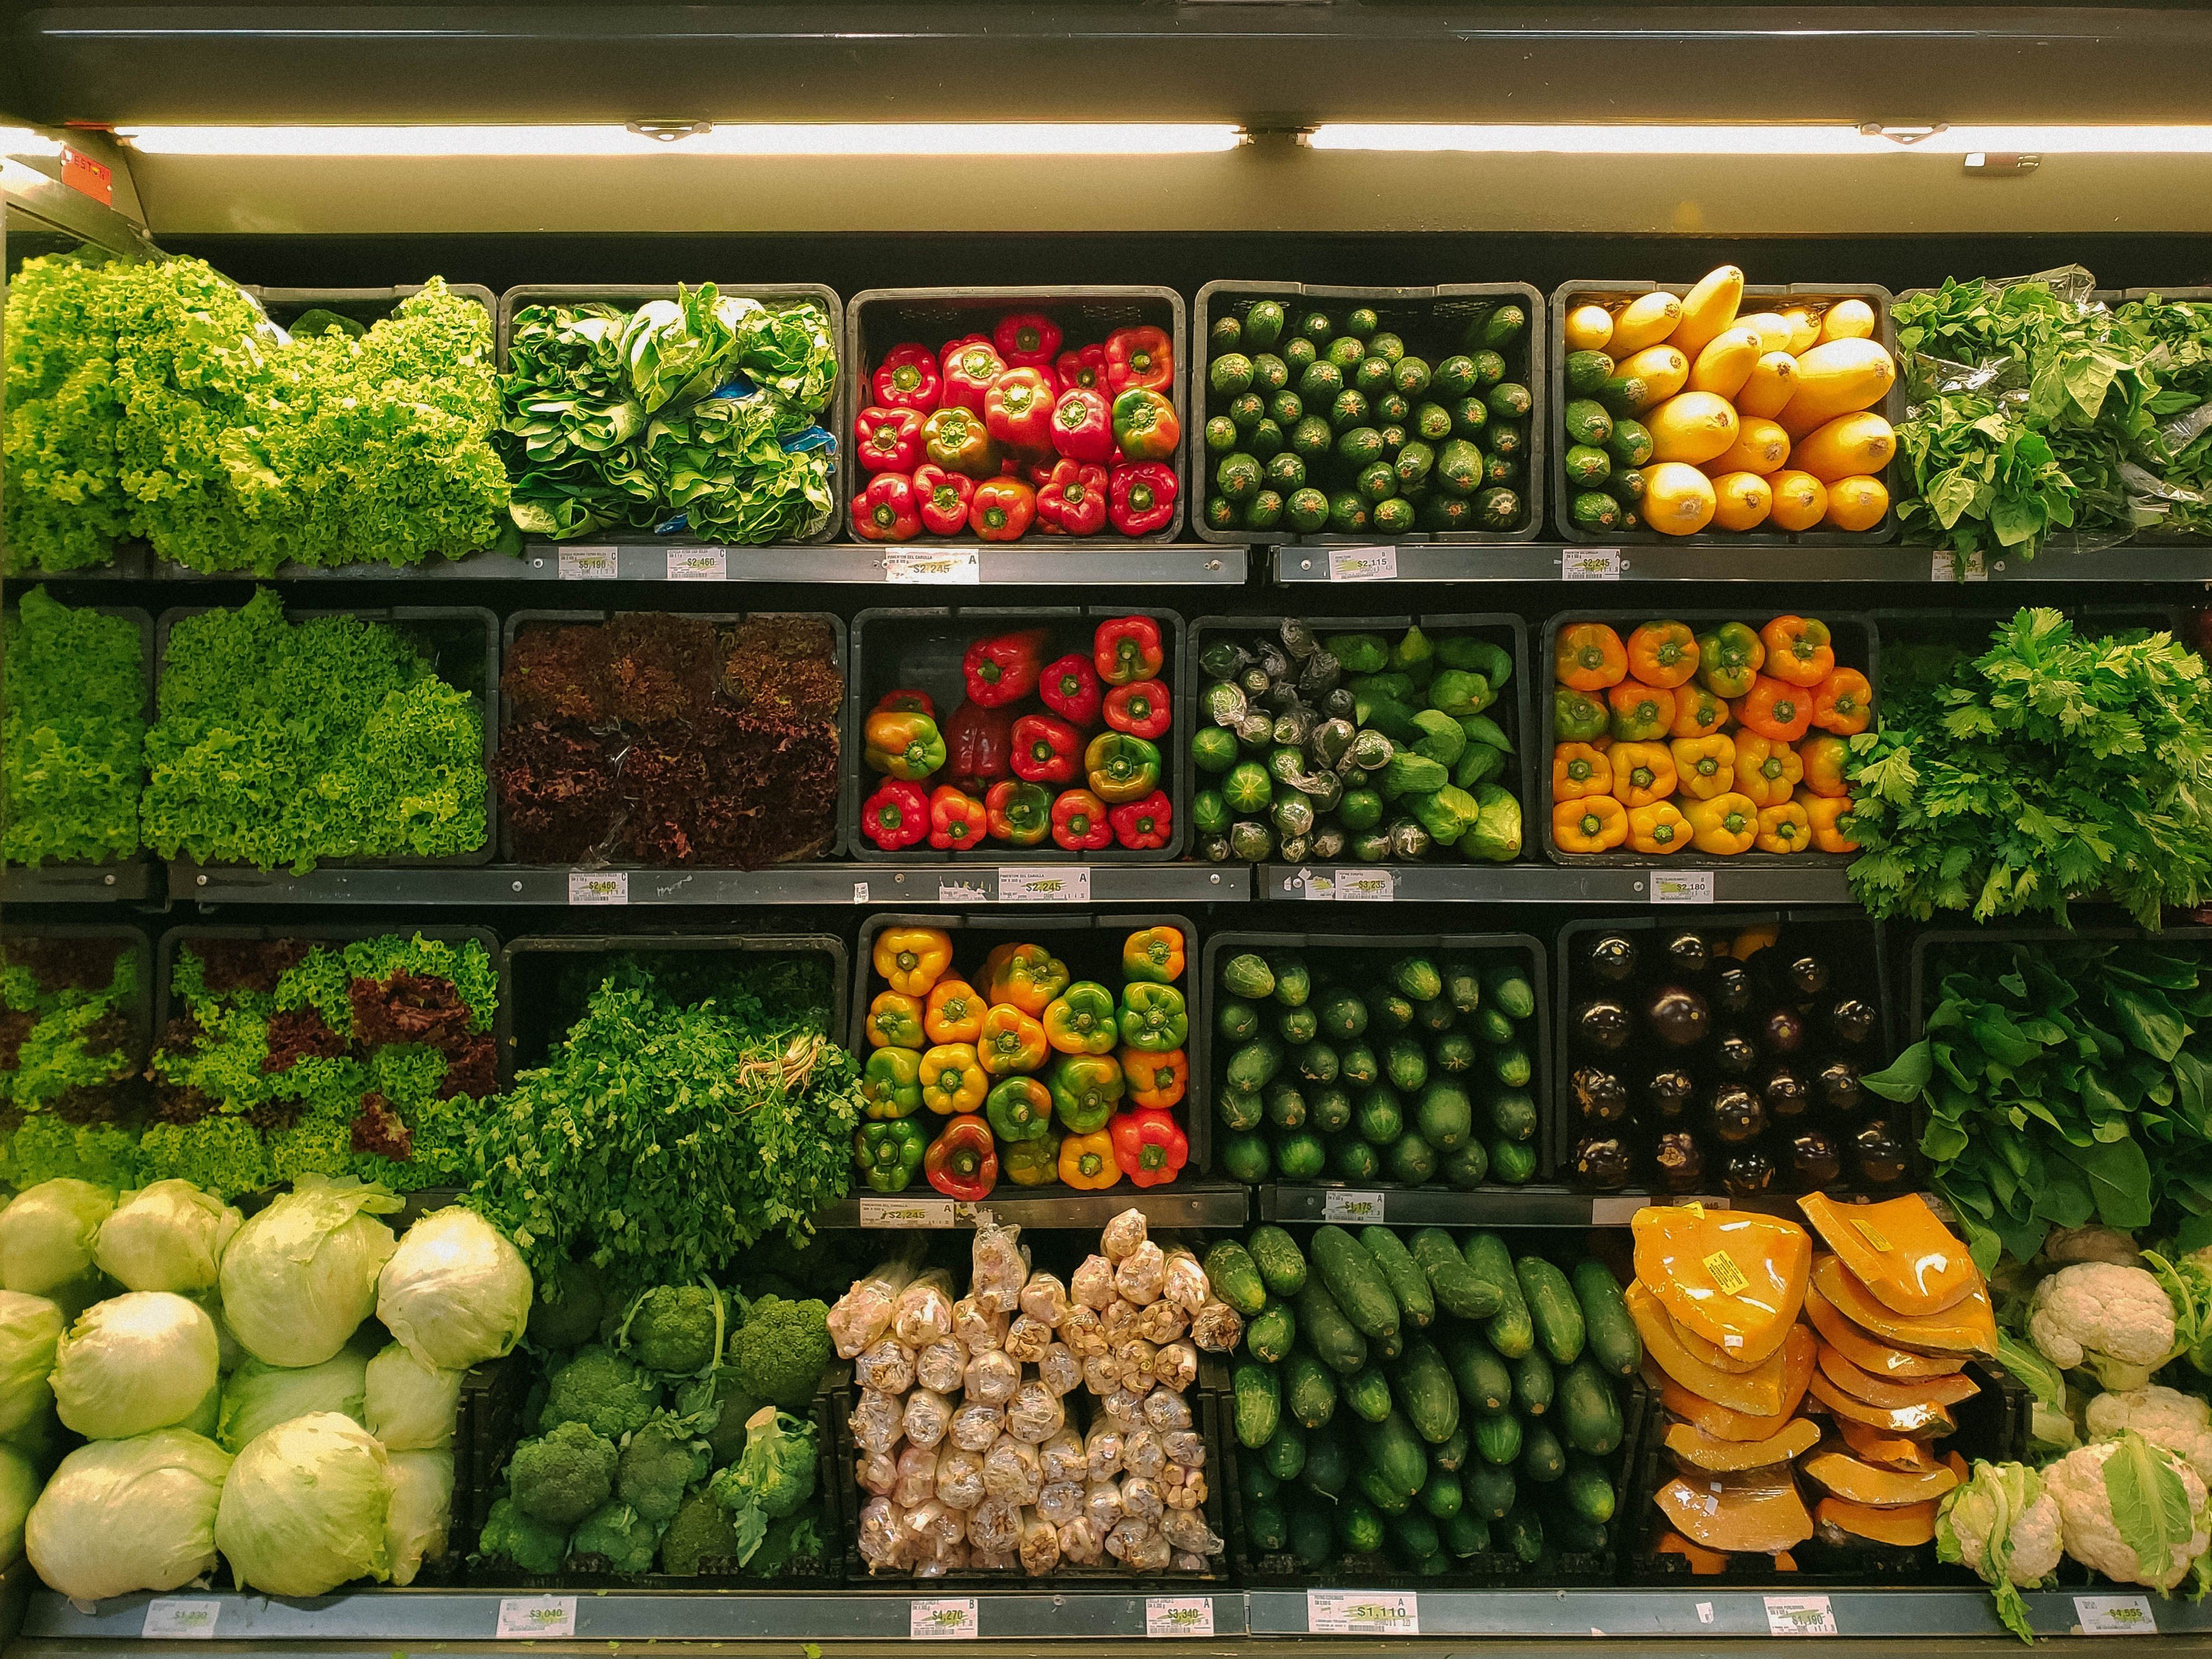 Fresh produce shoppers look to reduce carbon footprint by buying